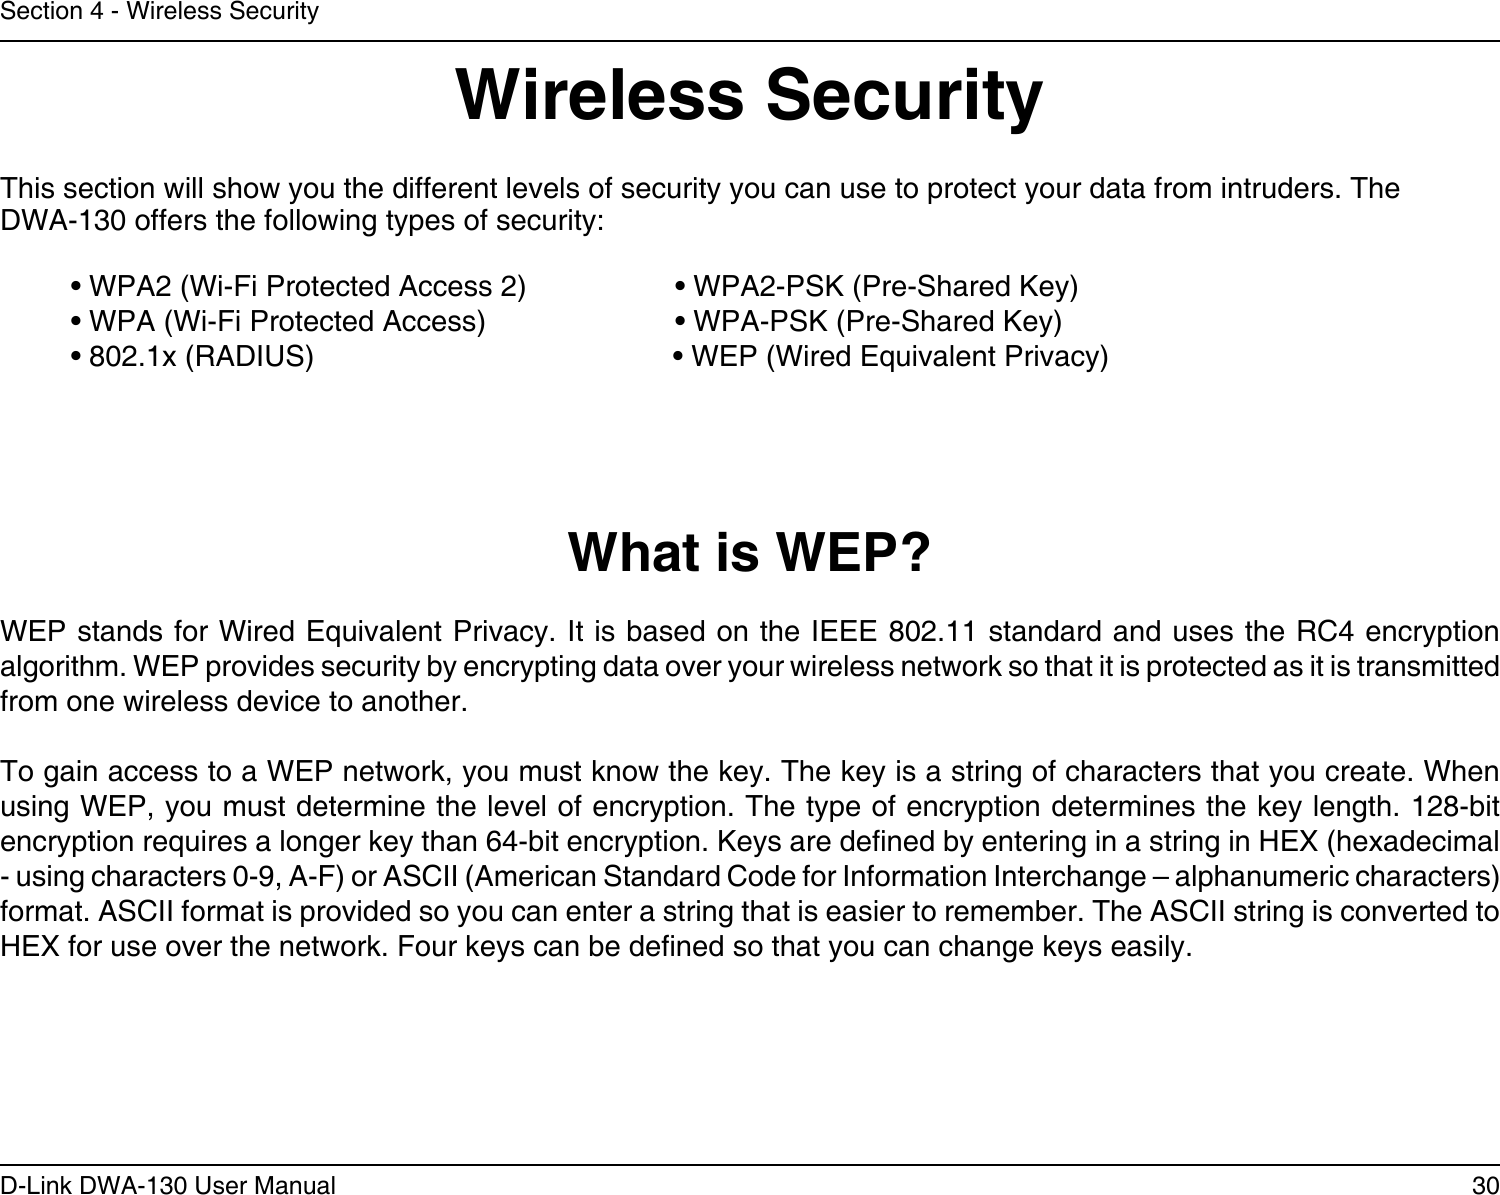 30D-Link DWA-130 User ManualSection 4 - Wireless SecurityWireless SecurityThis section will show you the different levels of security you can use to protect your data from intruders. The DWA-130 offers the following types of security:• WPA2 (Wi-Fi Protected Access 2)     • WPA2-PSK (Pre-Shared Key)• WPA (Wi-Fi Protected Access)      • WPA-PSK (Pre-Shared Key)• 802.1x (RADIUS)                          • WEP (Wired Equivalent Privacy)What is WEP?WEP stands for Wired Equivalent Privacy. It is based on the IEEE 802.11 standard and uses the RC4 encryption algorithm. WEP provides security by encrypting data over your wireless network so that it is protected as it is transmitted from one wireless device to another.To gain access to a WEP network, you must know the key. The key is a string of characters that you create. When using WEP, you must determine the level of encryption. The type of encryption determines the key length. 128-bit encryption requires a longer key than 64-bit encryption. Keys are dened by entering in a string in HEX (hexadecimal - using characters 0-9, A-F) or ASCII (American Standard Code for Information Interchange – alphanumeric characters) format. ASCII format is provided so you can enter a string that is easier to remember. The ASCII string is converted to HEX for use over the network. Four keys can be dened so that you can change keys easily.